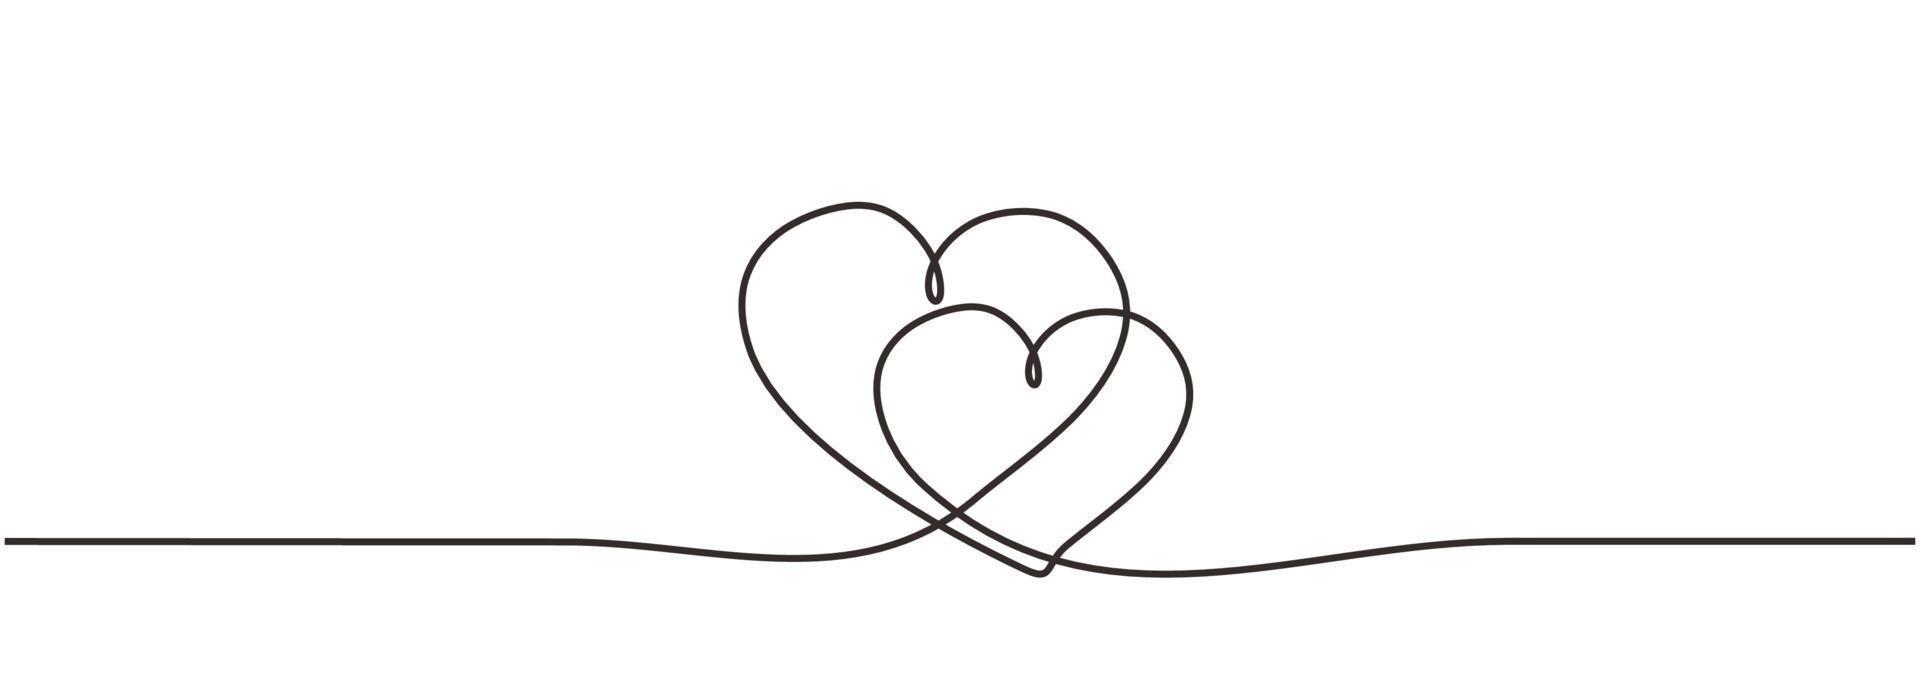 Love hearts sign continuous one line drawing. Single lineart vector